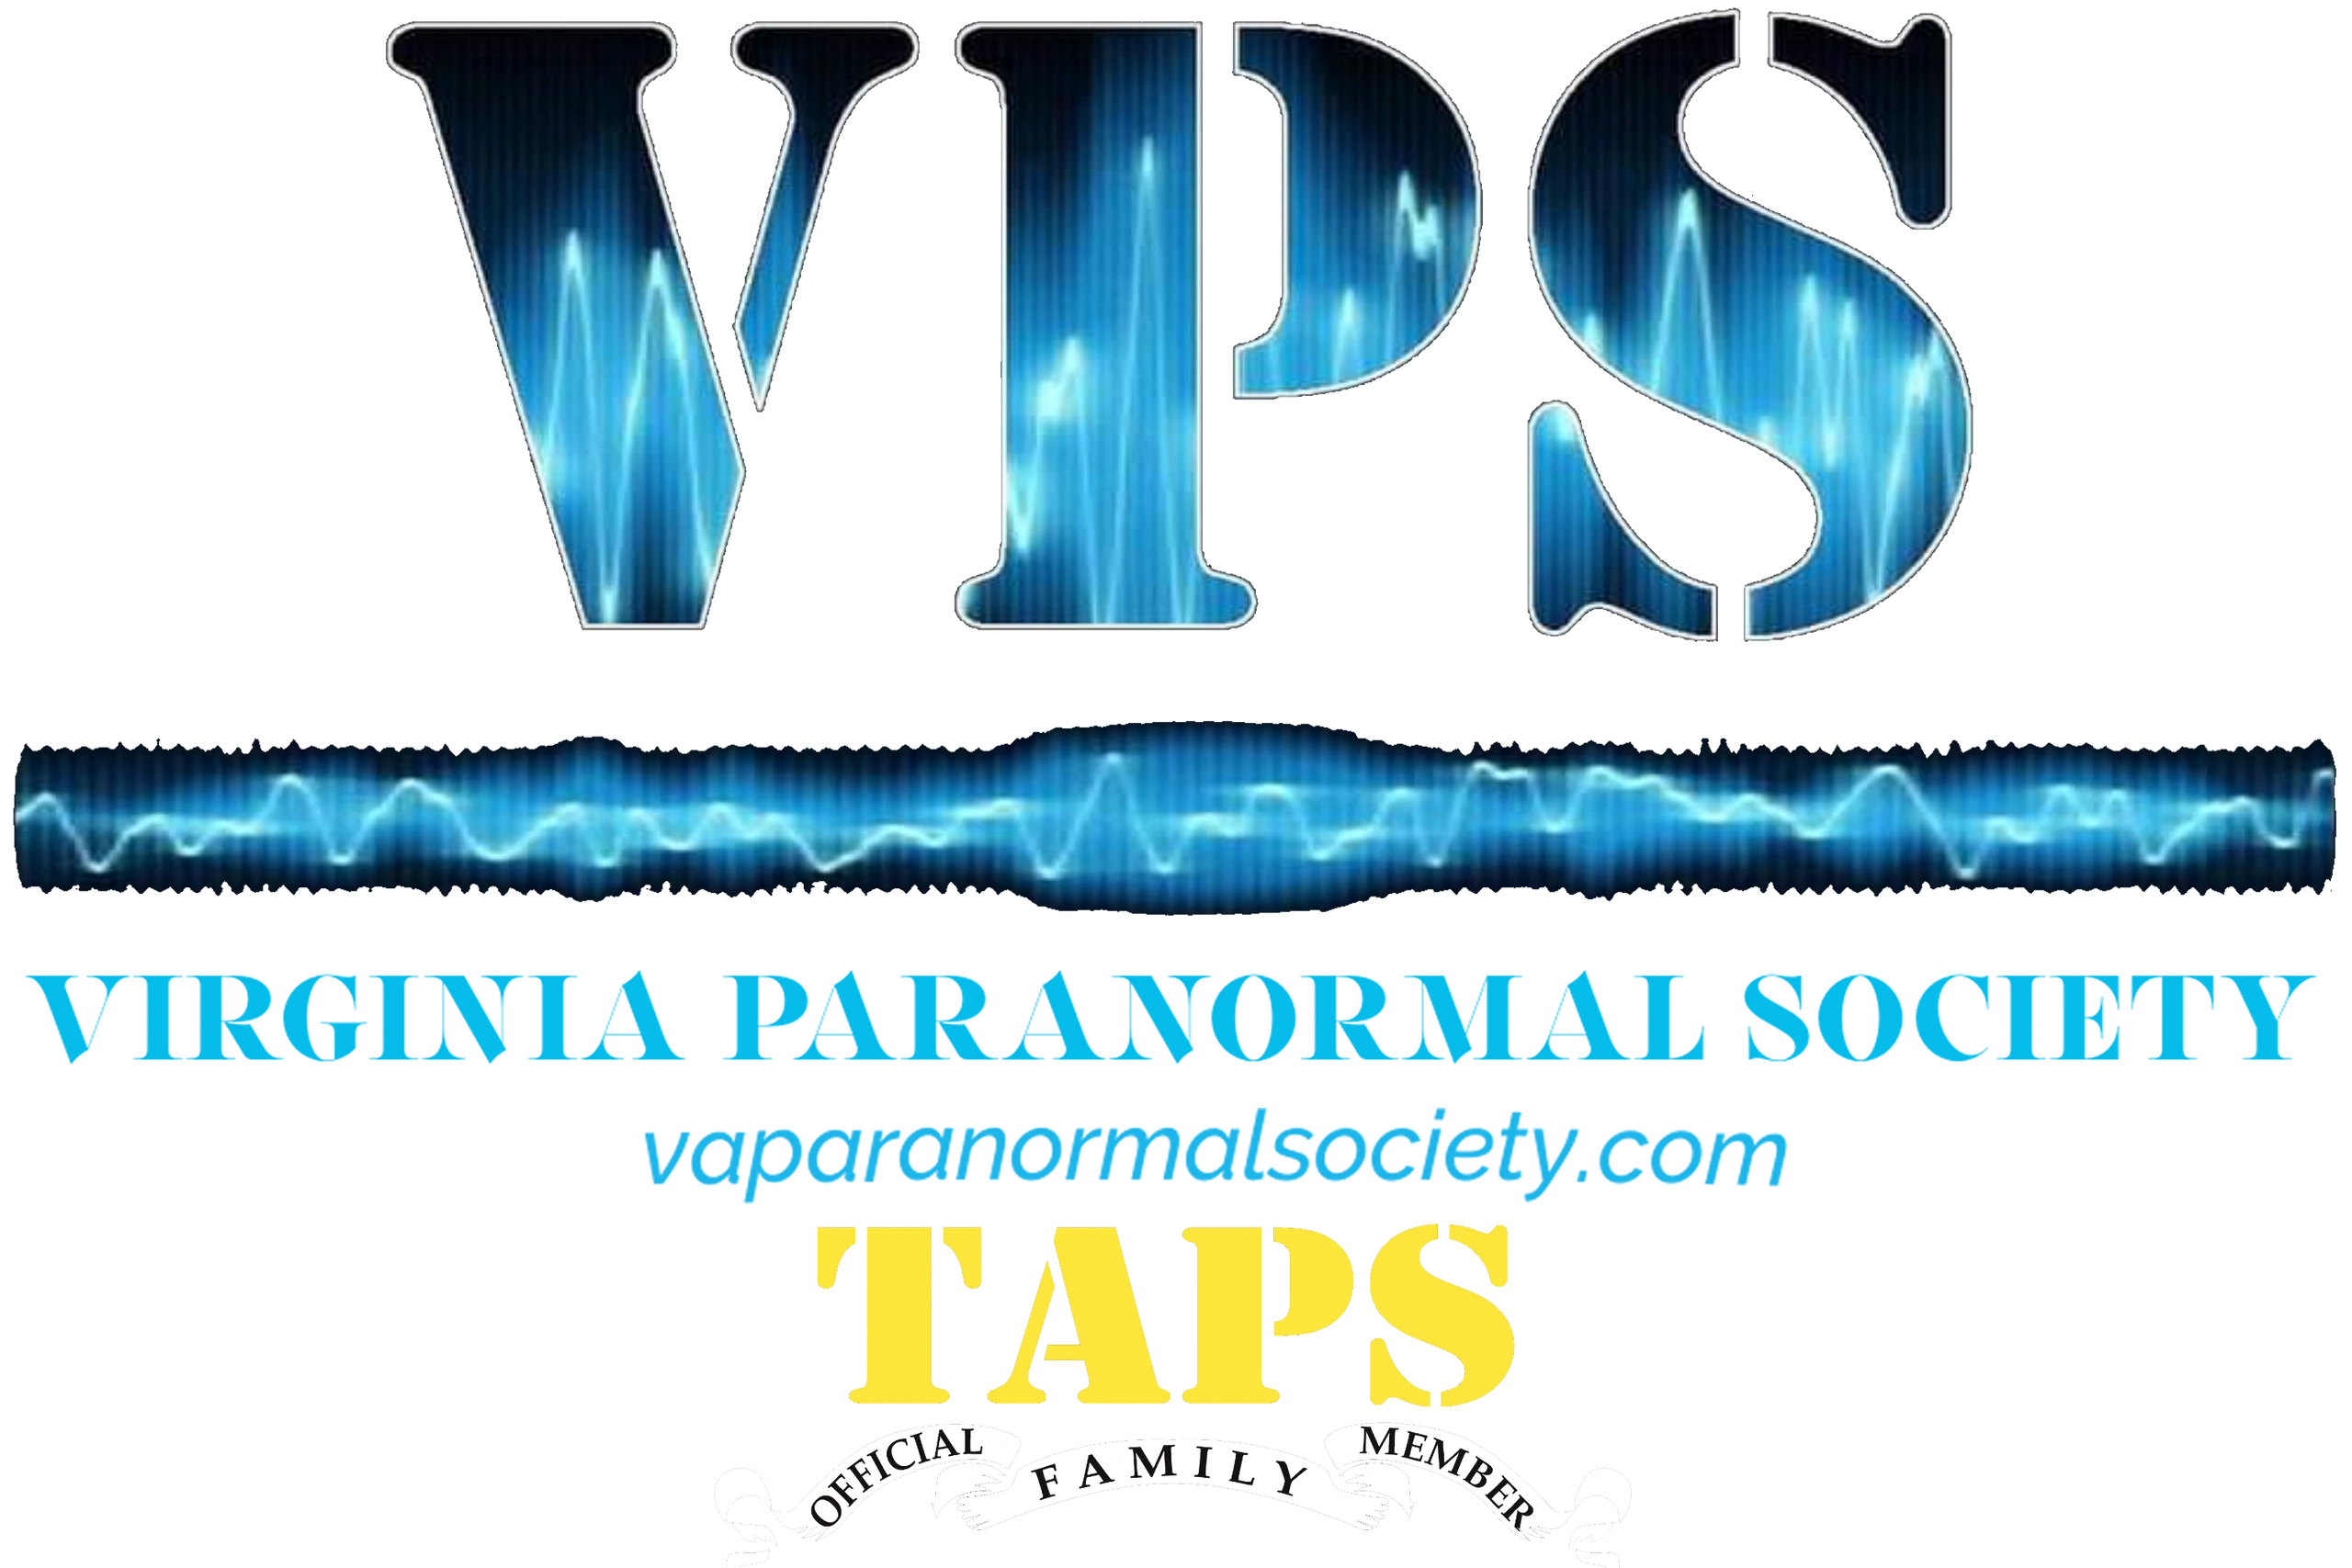 Virginia paranormal society logo with Soundwave
Official TAPS family member logo 